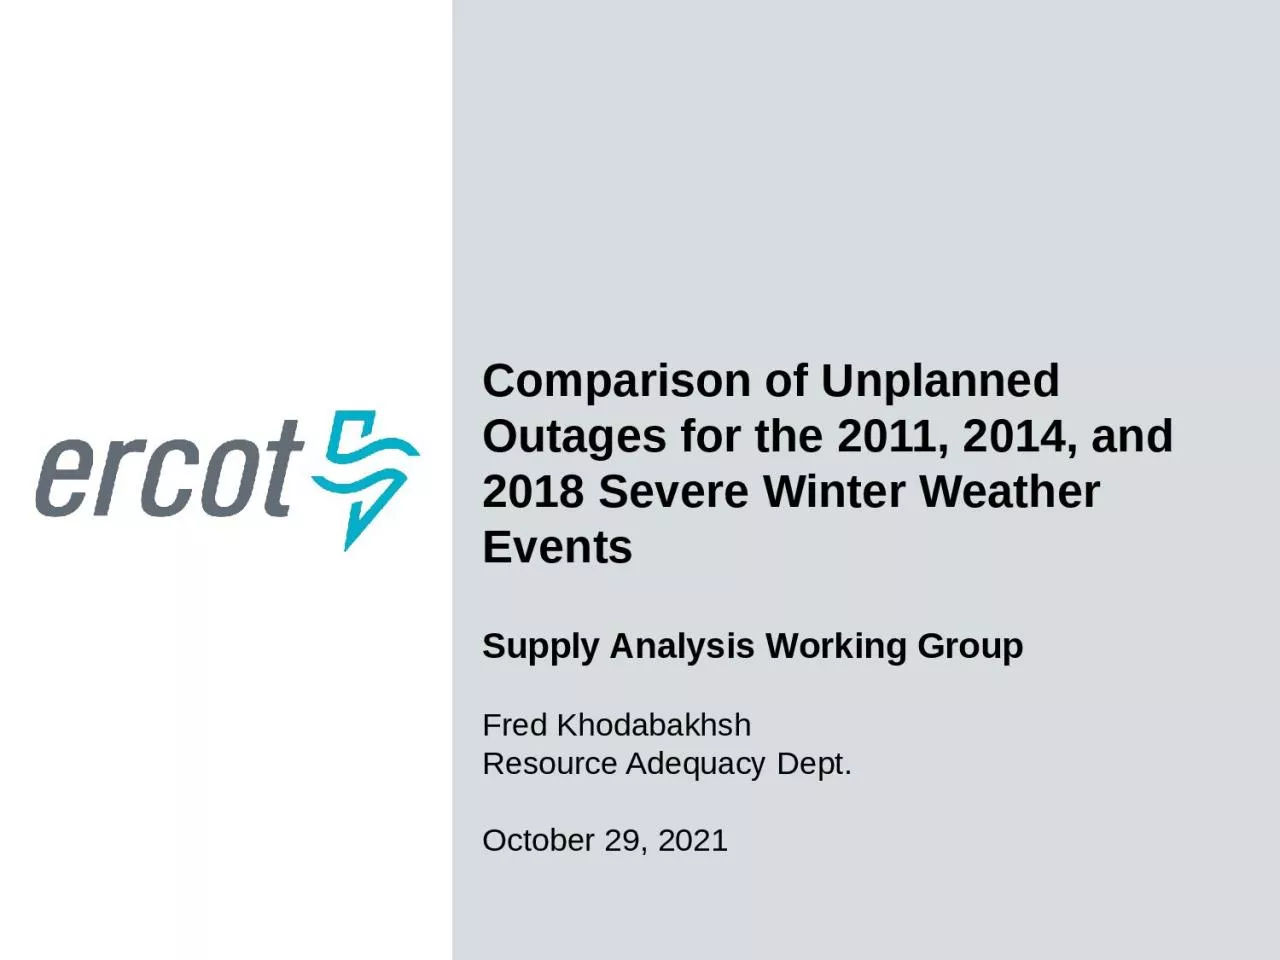 Comparison of Unplanned Outages for the 2011, 2014, and 2018 Severe Winter Weather Events